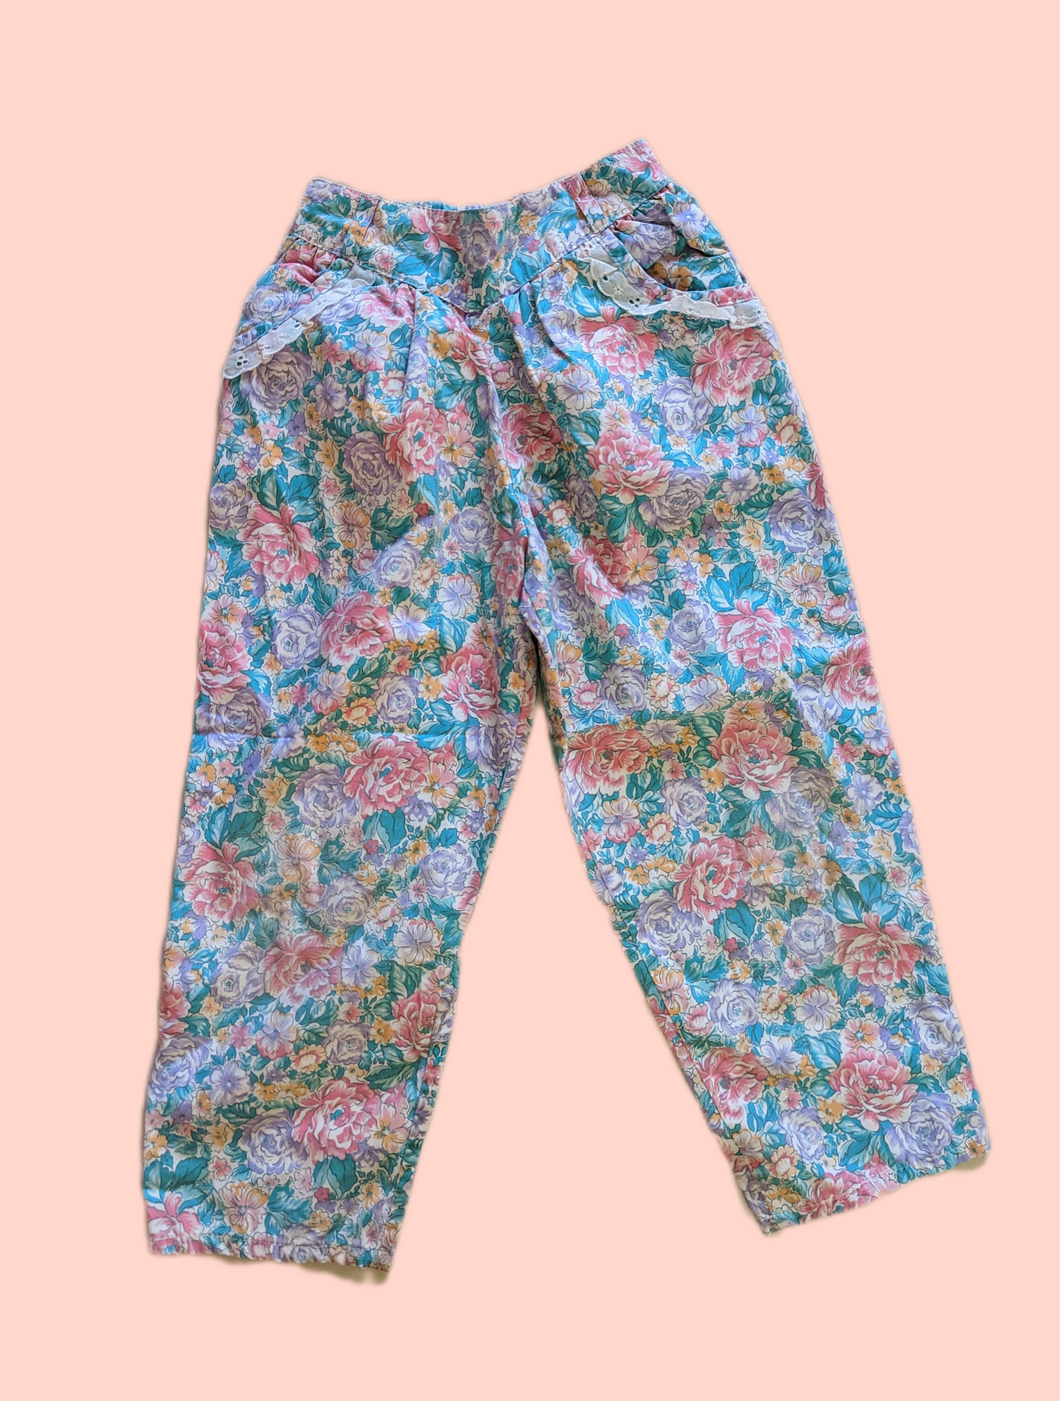 Floral Cotton High Waisted Pants 5t